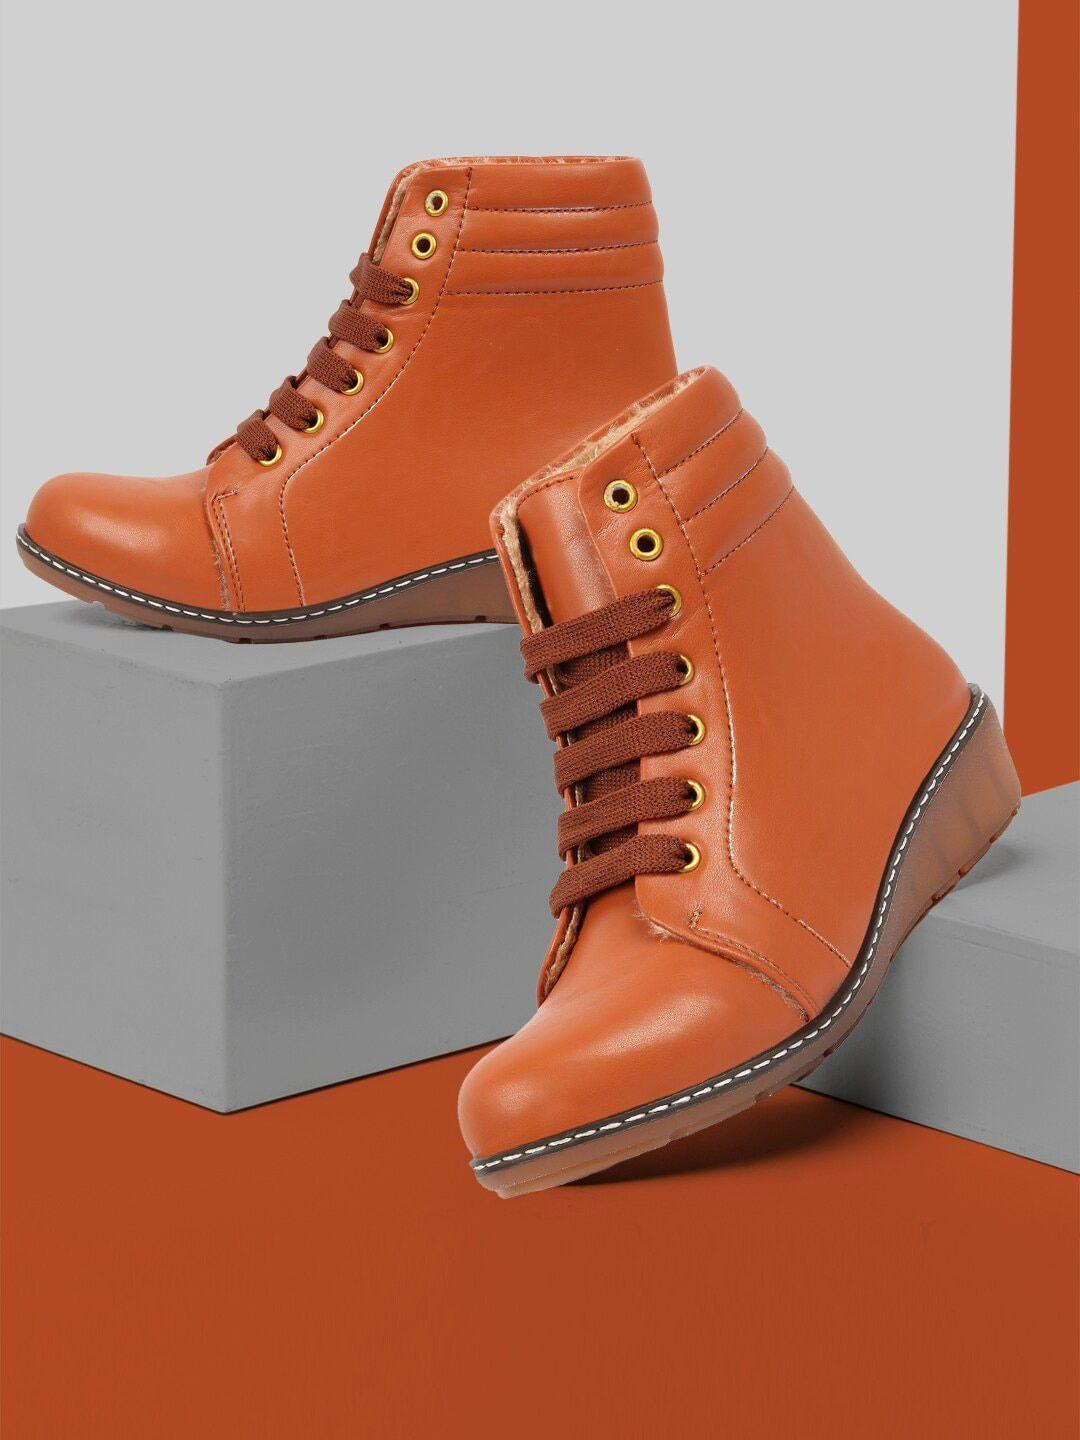 the roadster lifestyle co. women tan brown mid-top regular boots